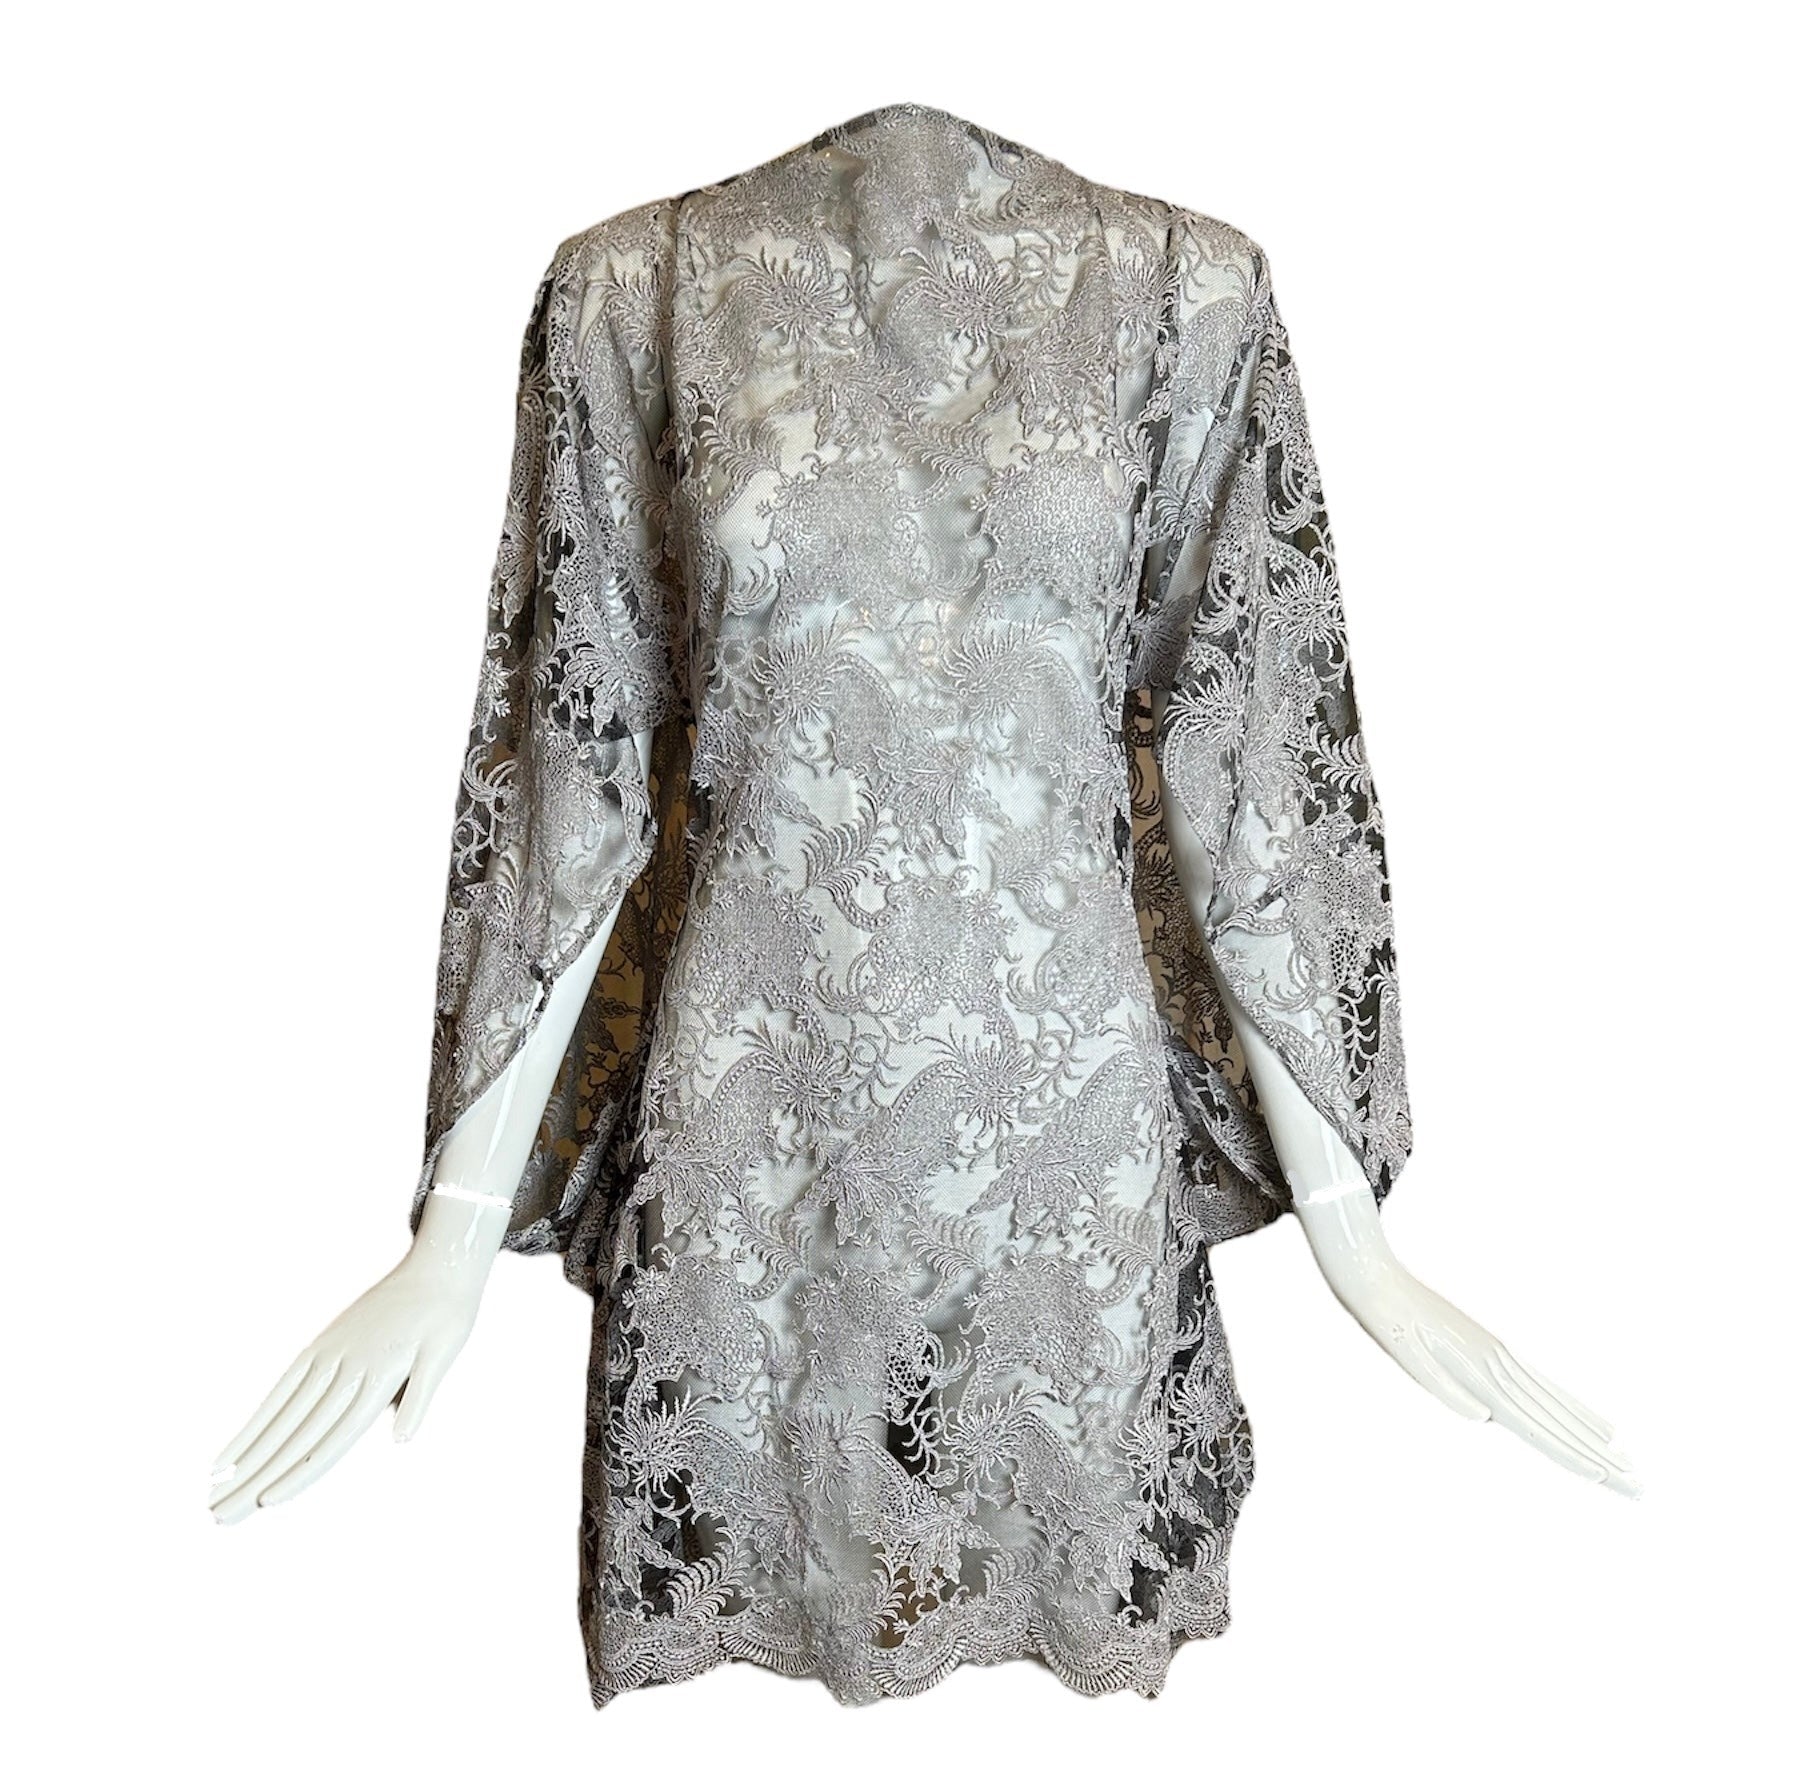 Junya Watanabe Comme Des Garcons Silver Kimono-Style Sleeve Lace Dress FRONT PHOTO 1 OF 5